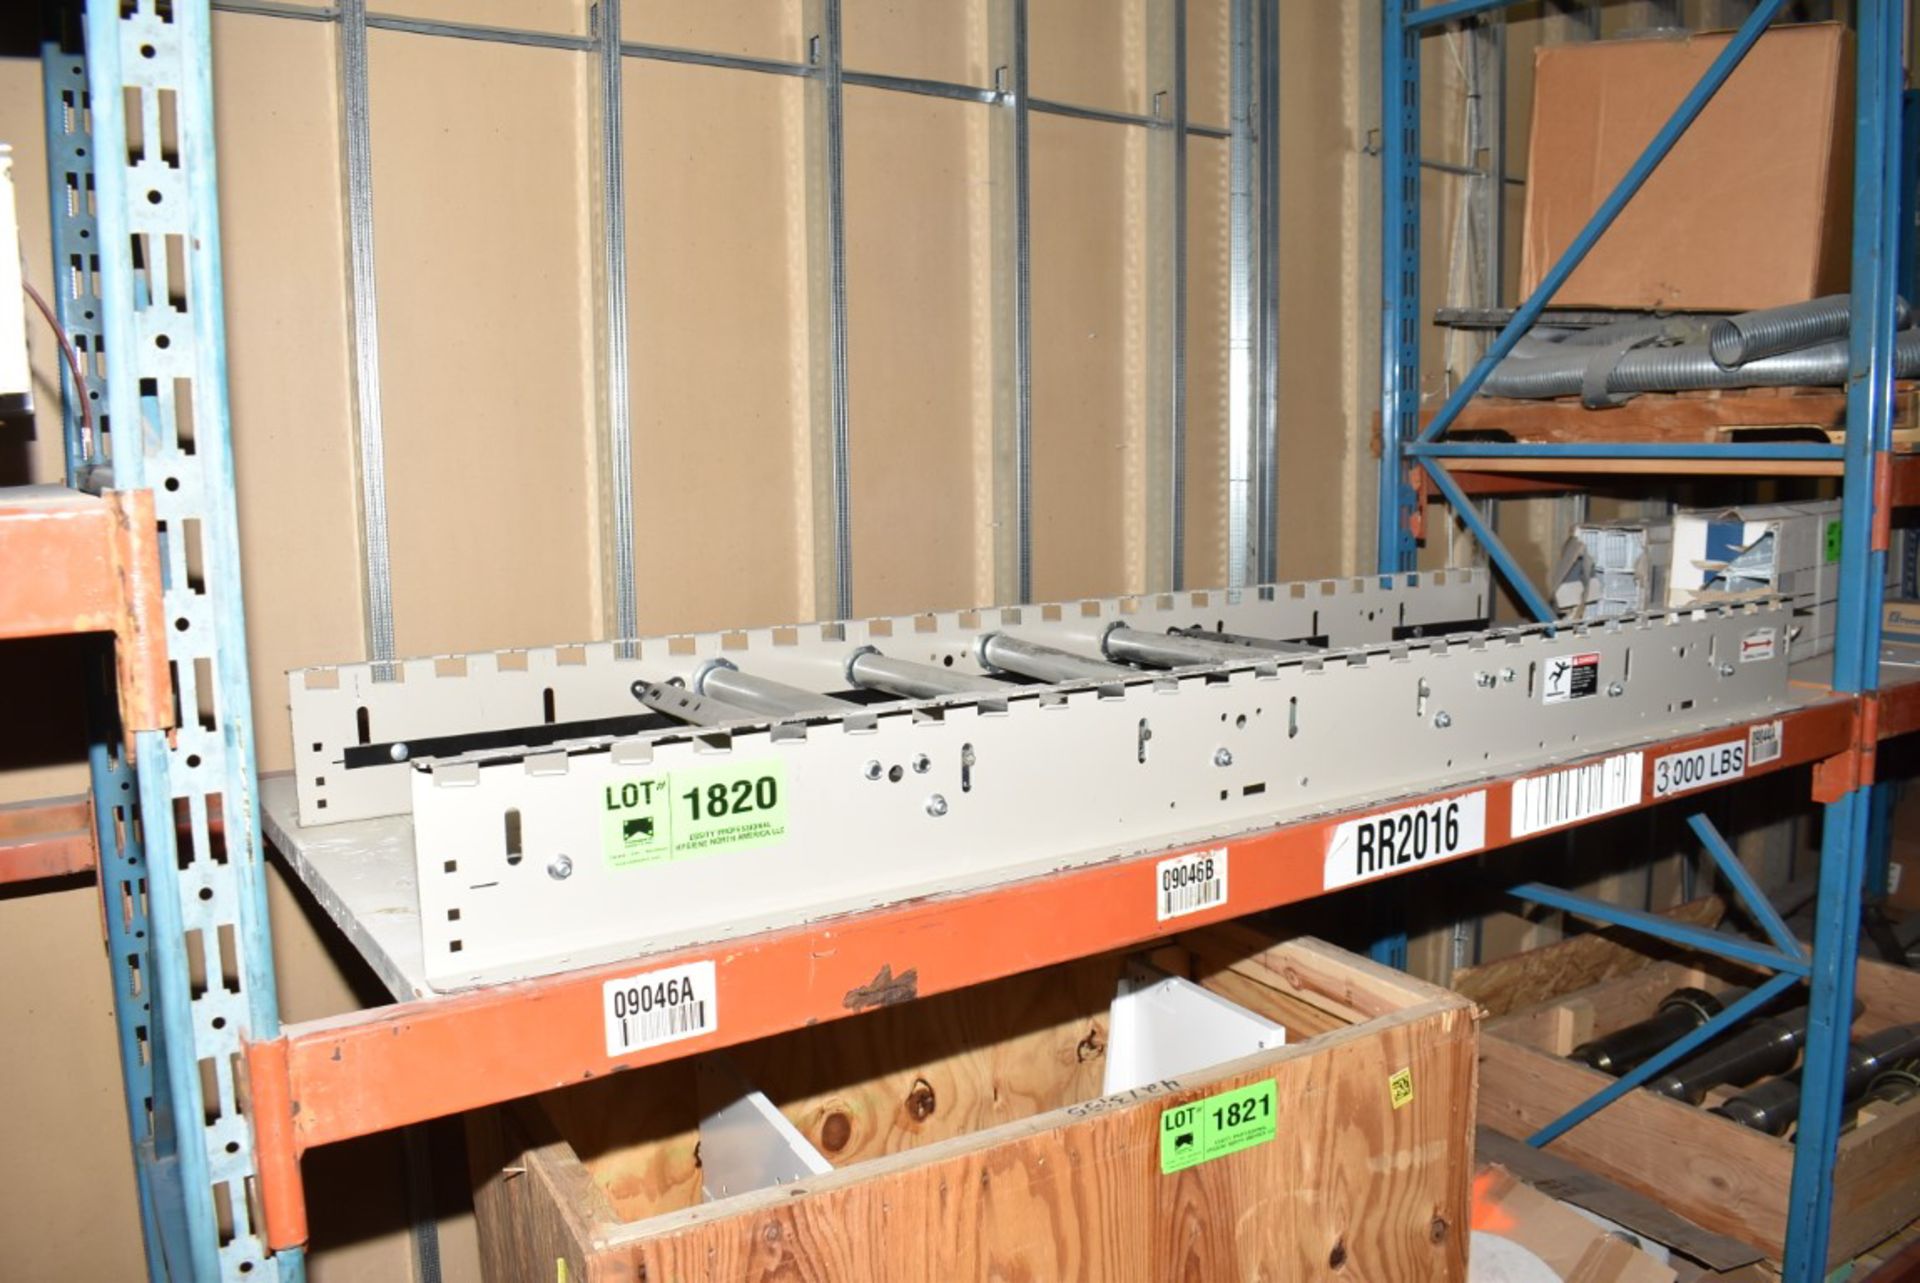 POWERED CONVEYOR SECTION [RIGGING FEE FOR LOT #1820 - $25 USD PLUS APPLICABLE TAXES]